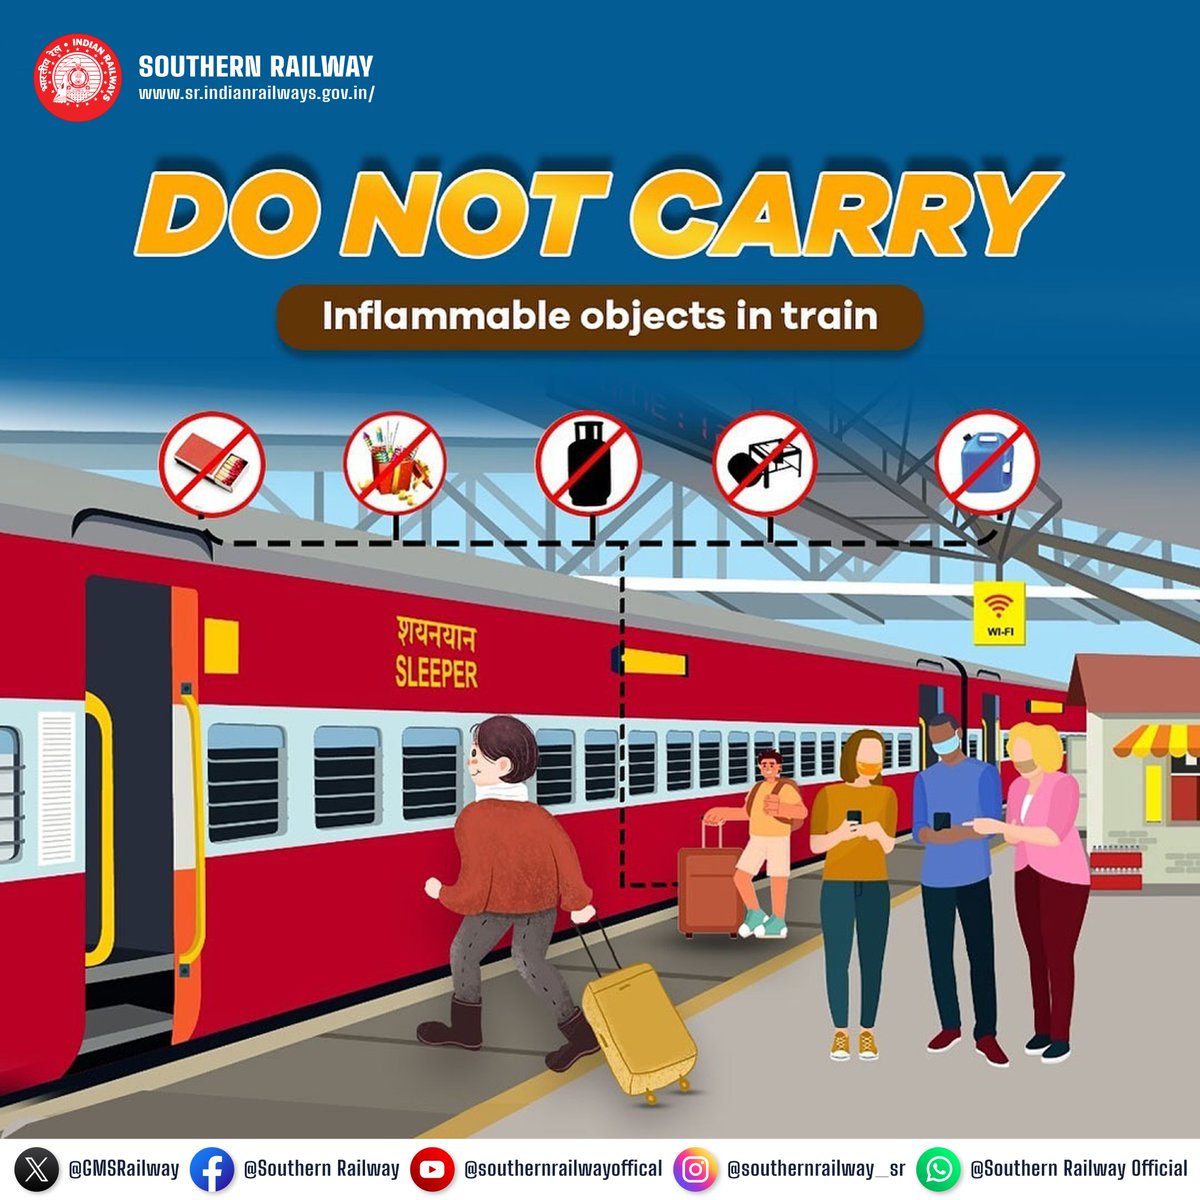 Pack smart, travel safe!

For a #SafeJourney, please avoid carrying inflammable items like lighters, matchboxes, fireworks, gas cylinders, or kerosene on trains. Let's prioritize safety for everyone.  

#SouthernRailway #TravelSafe #TravelEssentials #SafetyFirst #RailwaySafety